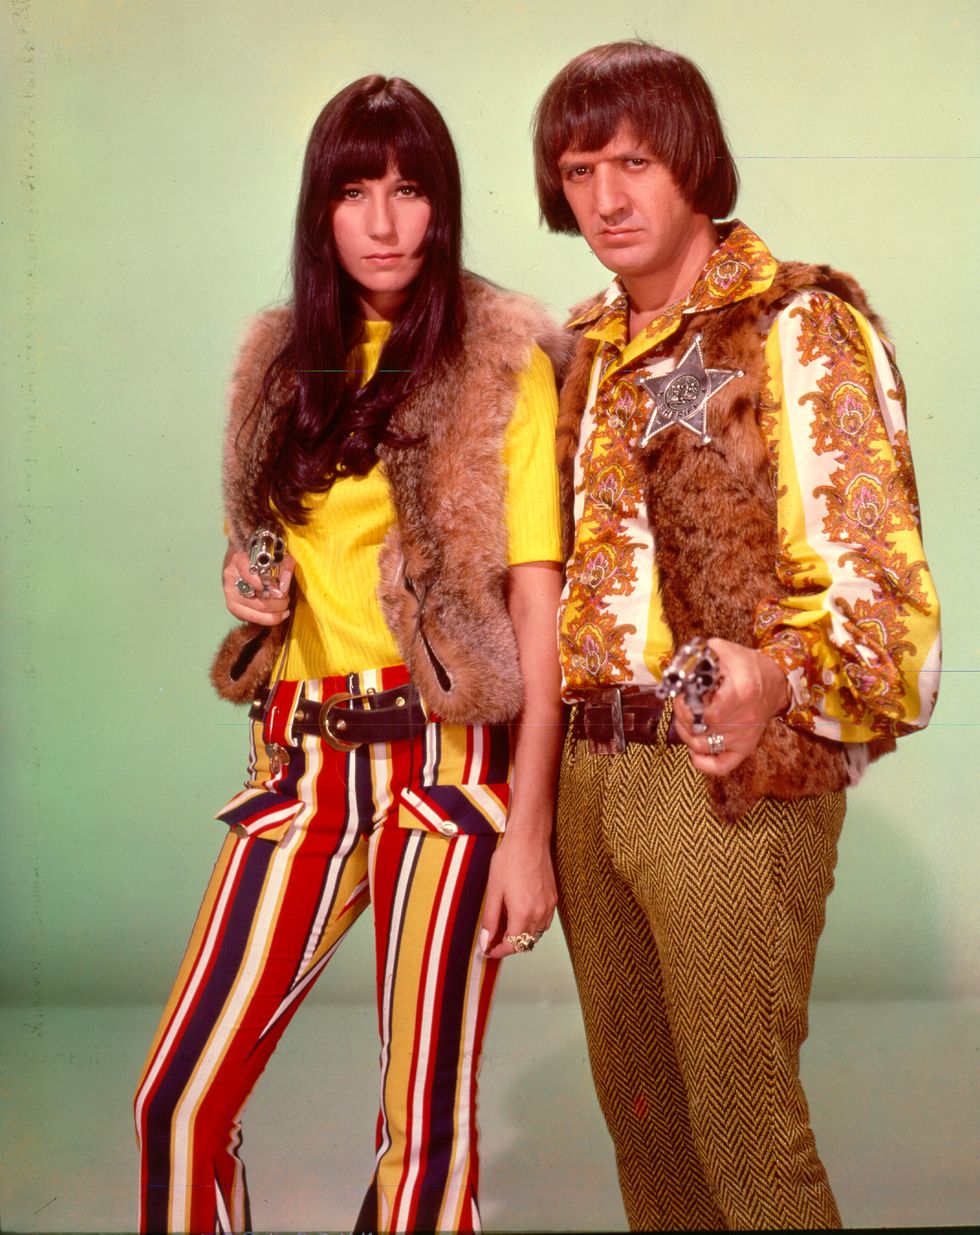 How Sonny And Cher Went From Tv Power Couple To Bitter Exes